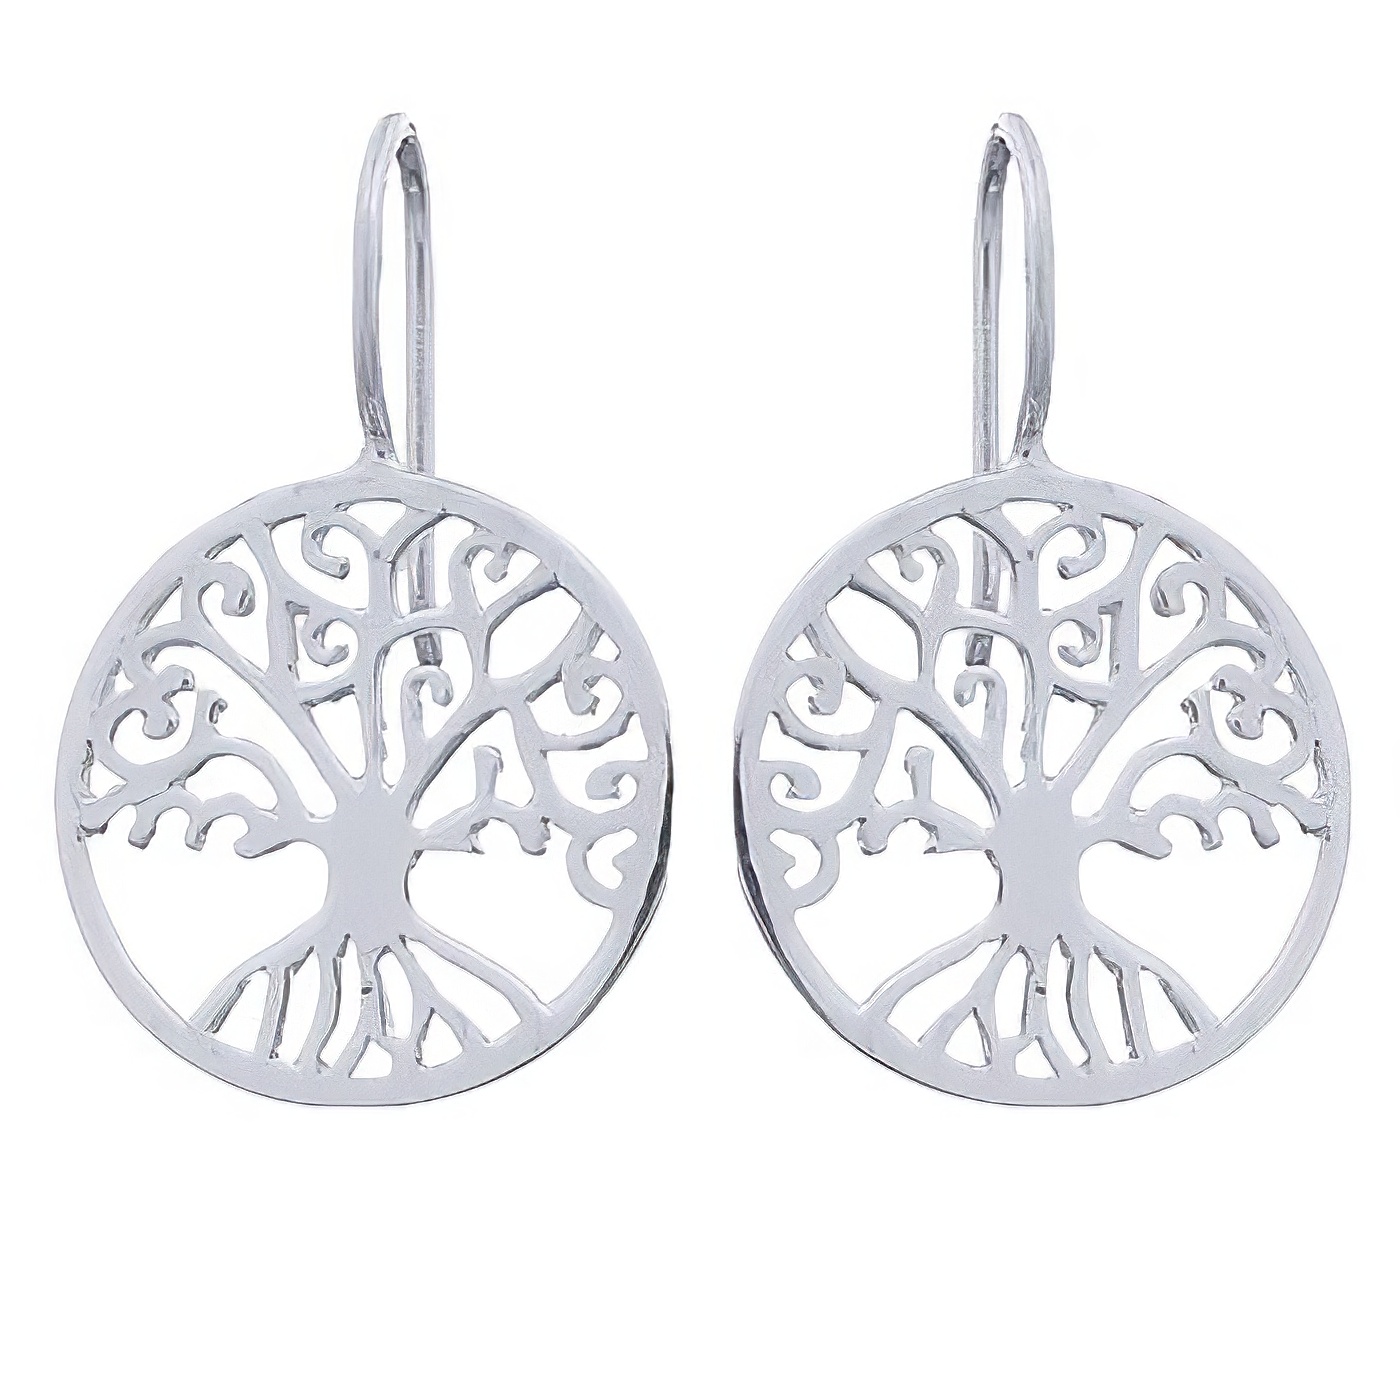 Exquisite detailed tree of life casted 925 sterling silver drop earrings by BeYindi 